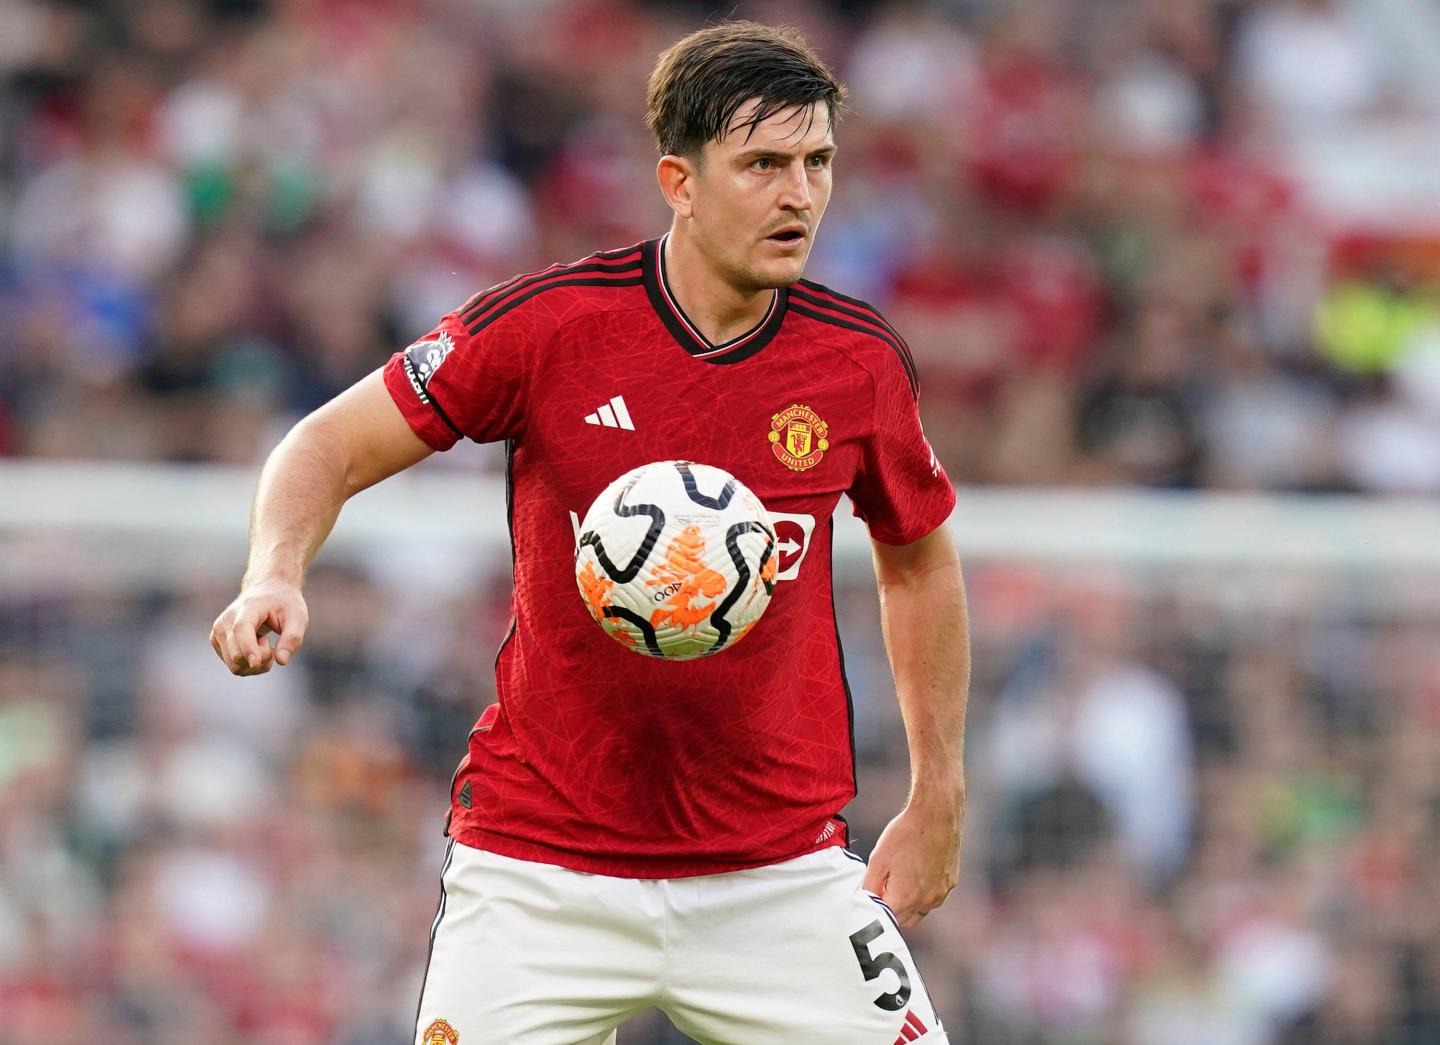 2023-harry-maguire-manchester-6609-2064-1697116892